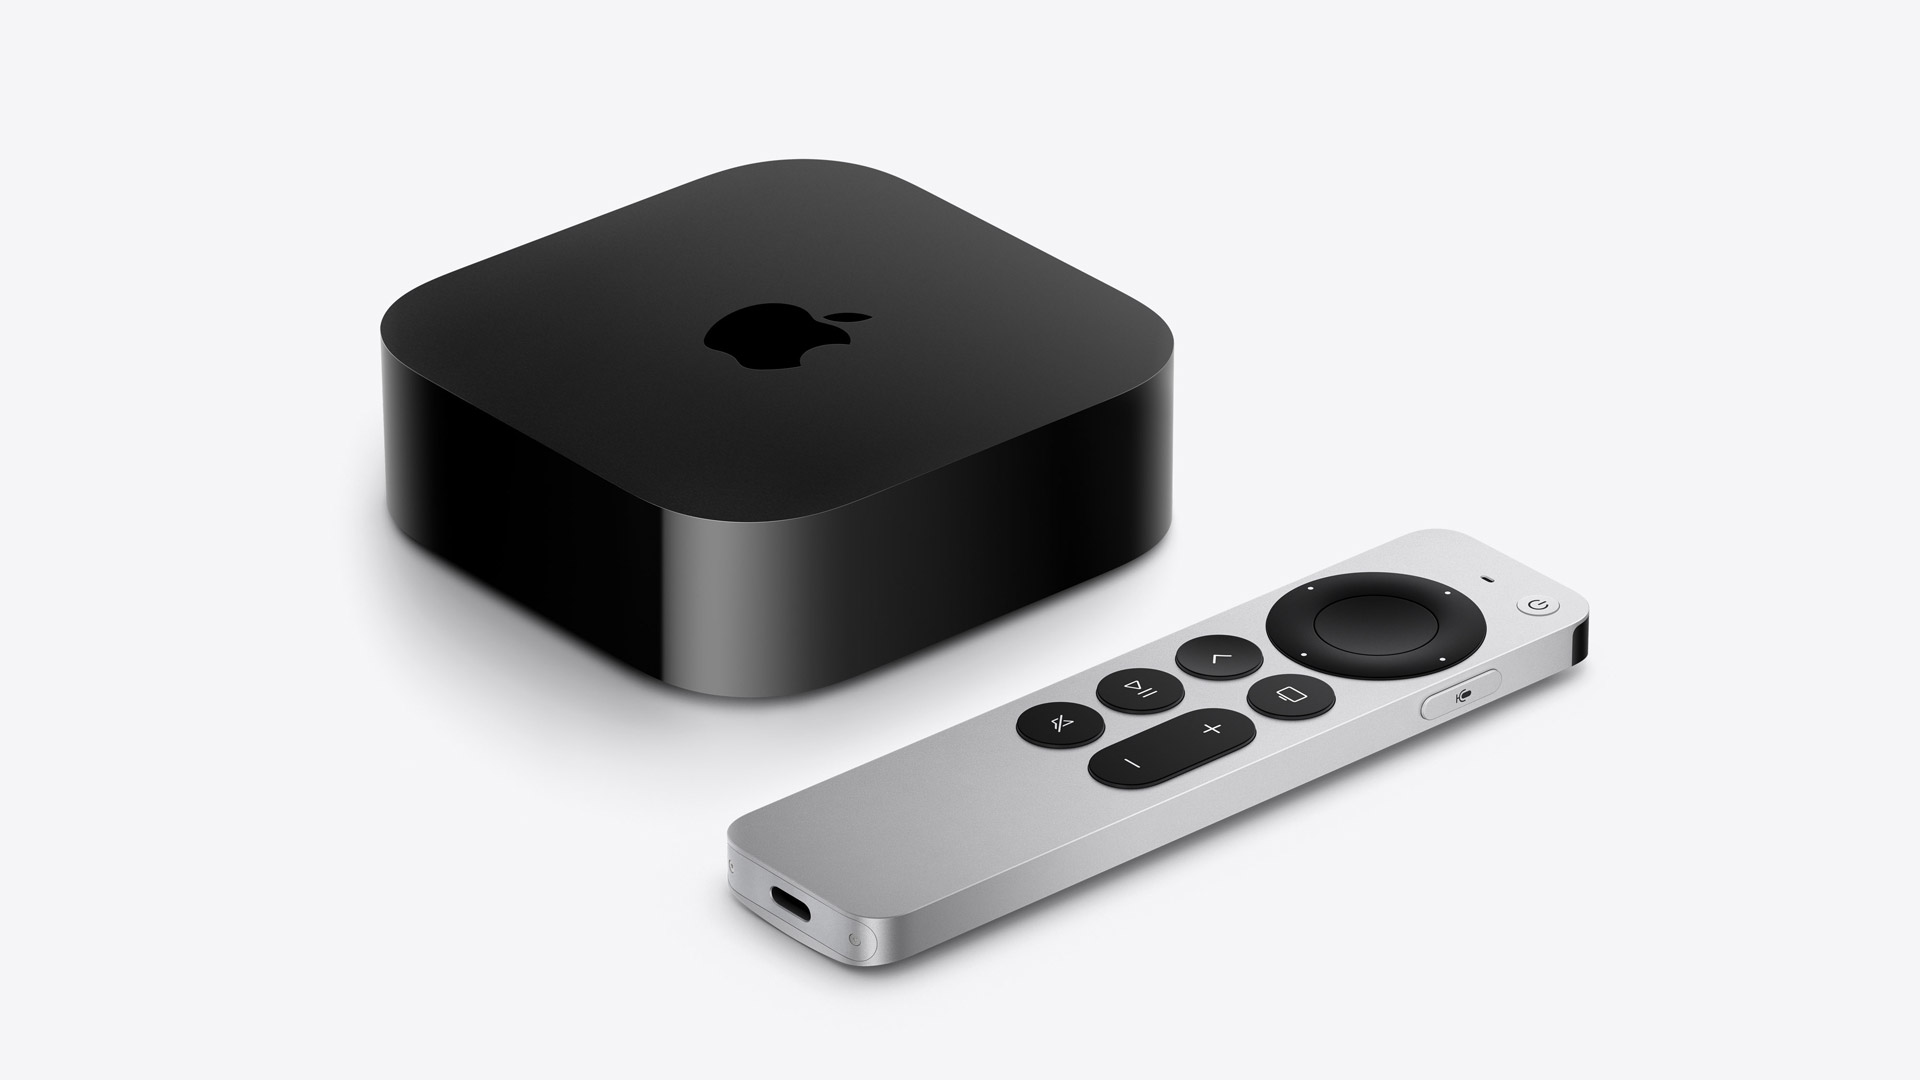 New Apple TV 4K doesn't come with charging cable for Siri Remote